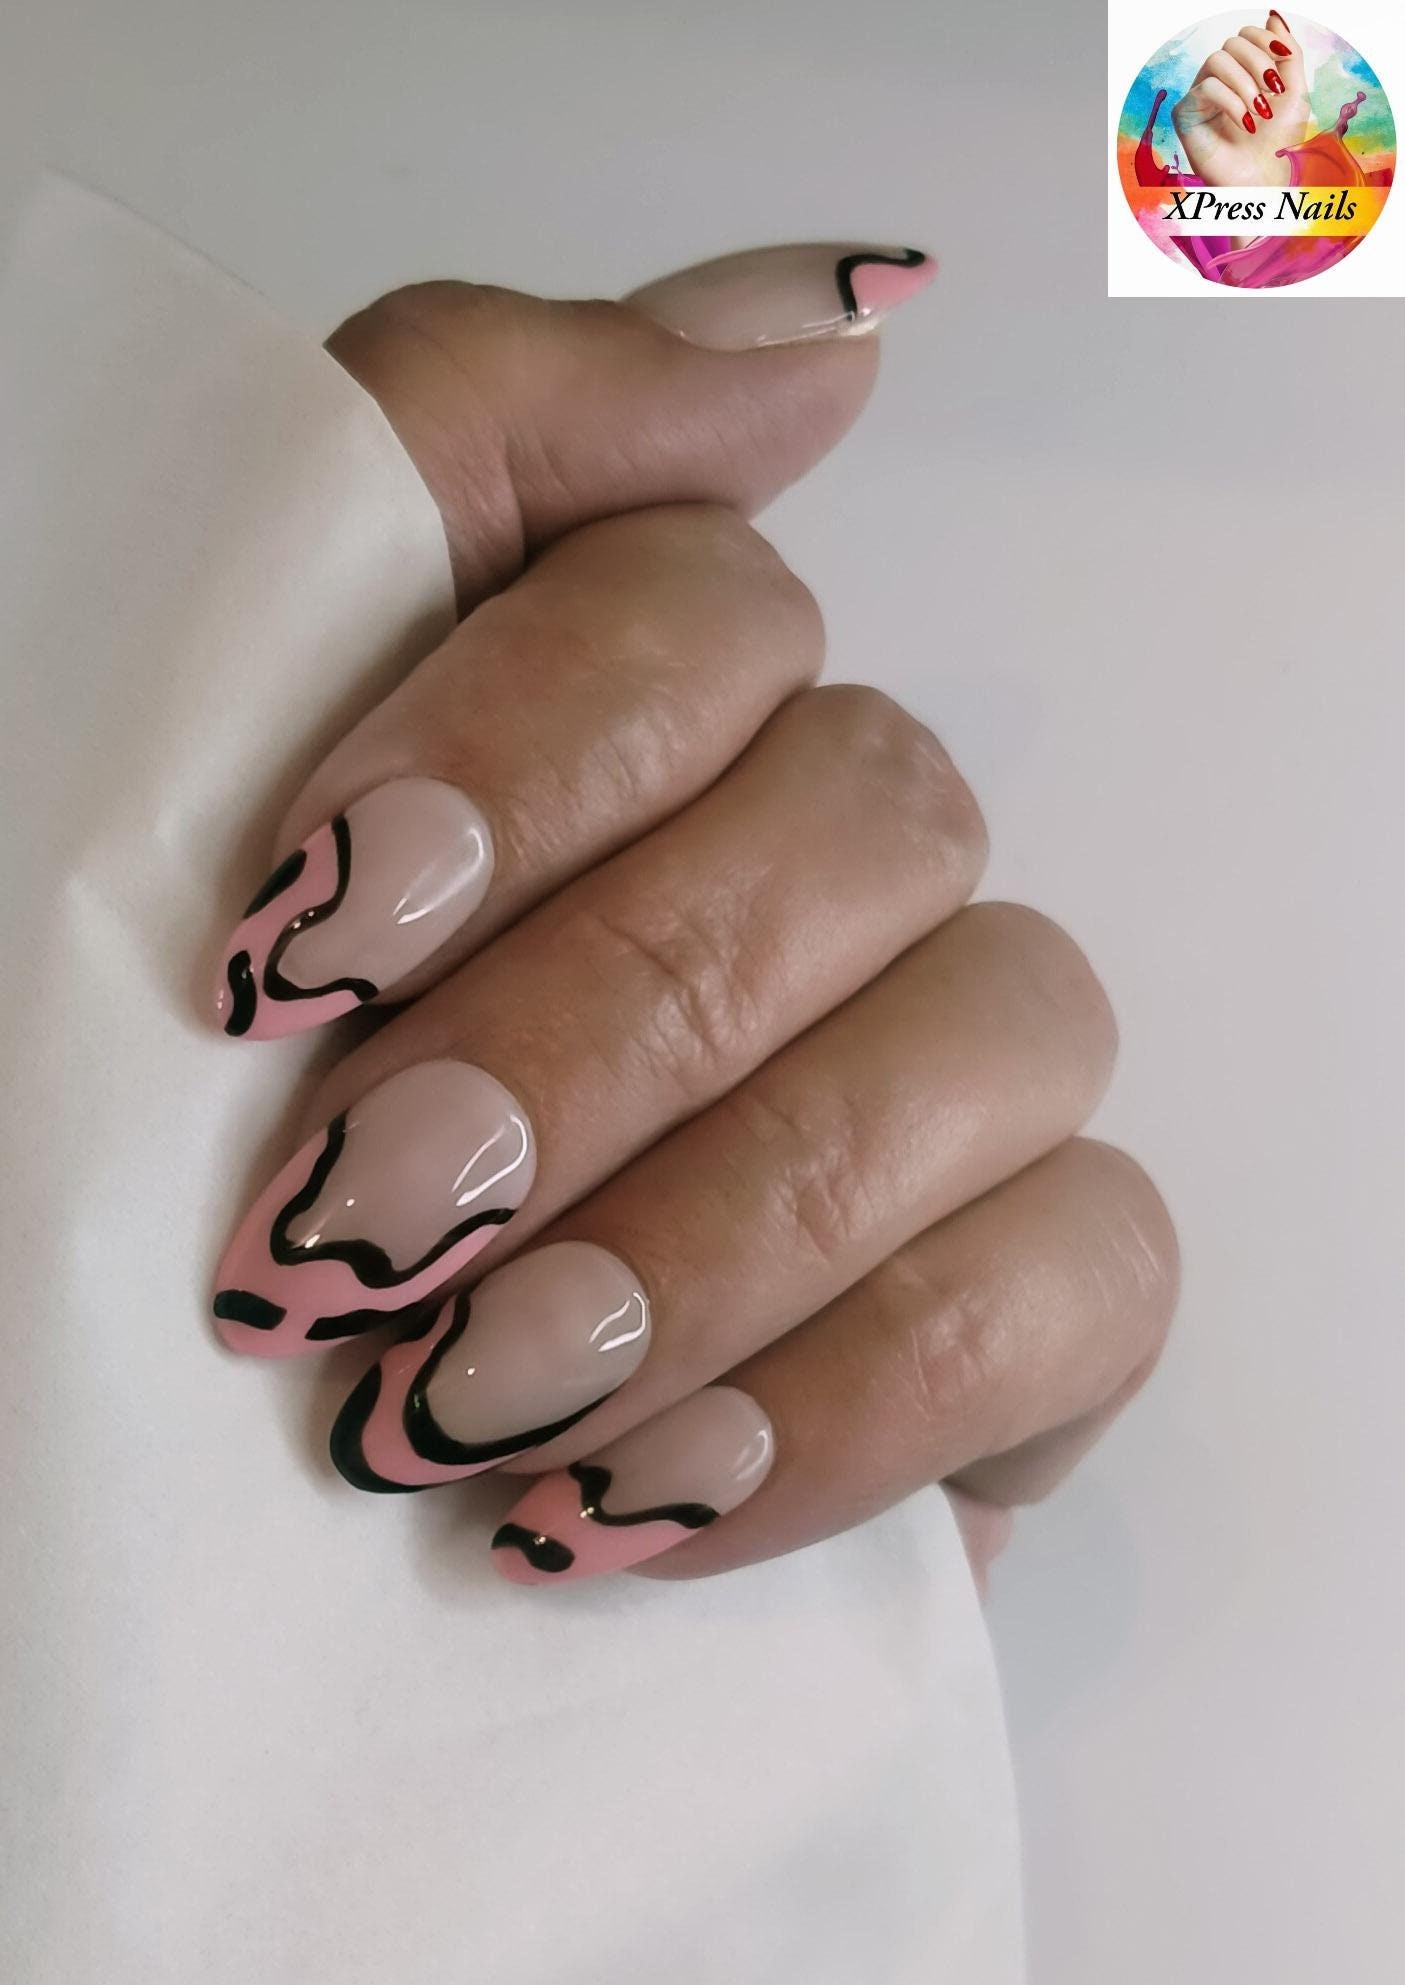 Pink & Purple Abstract Swirly Nail Art Press on Nails styled in Medium  Almond 